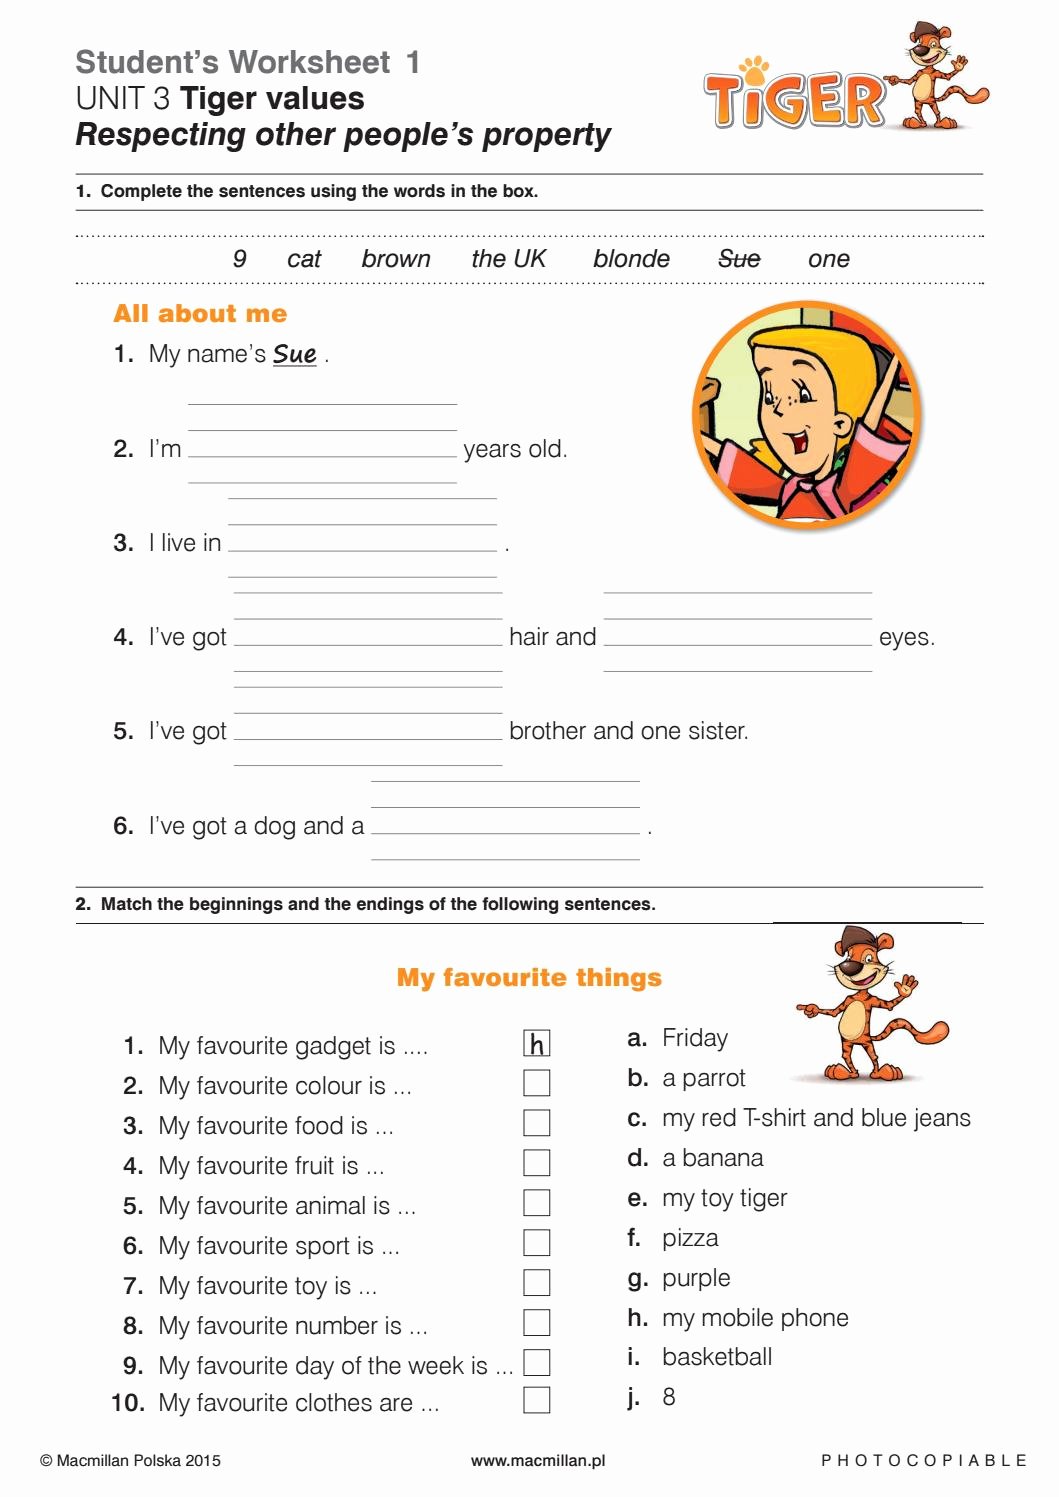 Respecting Others Property Worksheet Fresh Sw Tiger 2 L3 Respecting Other Peoples Property by